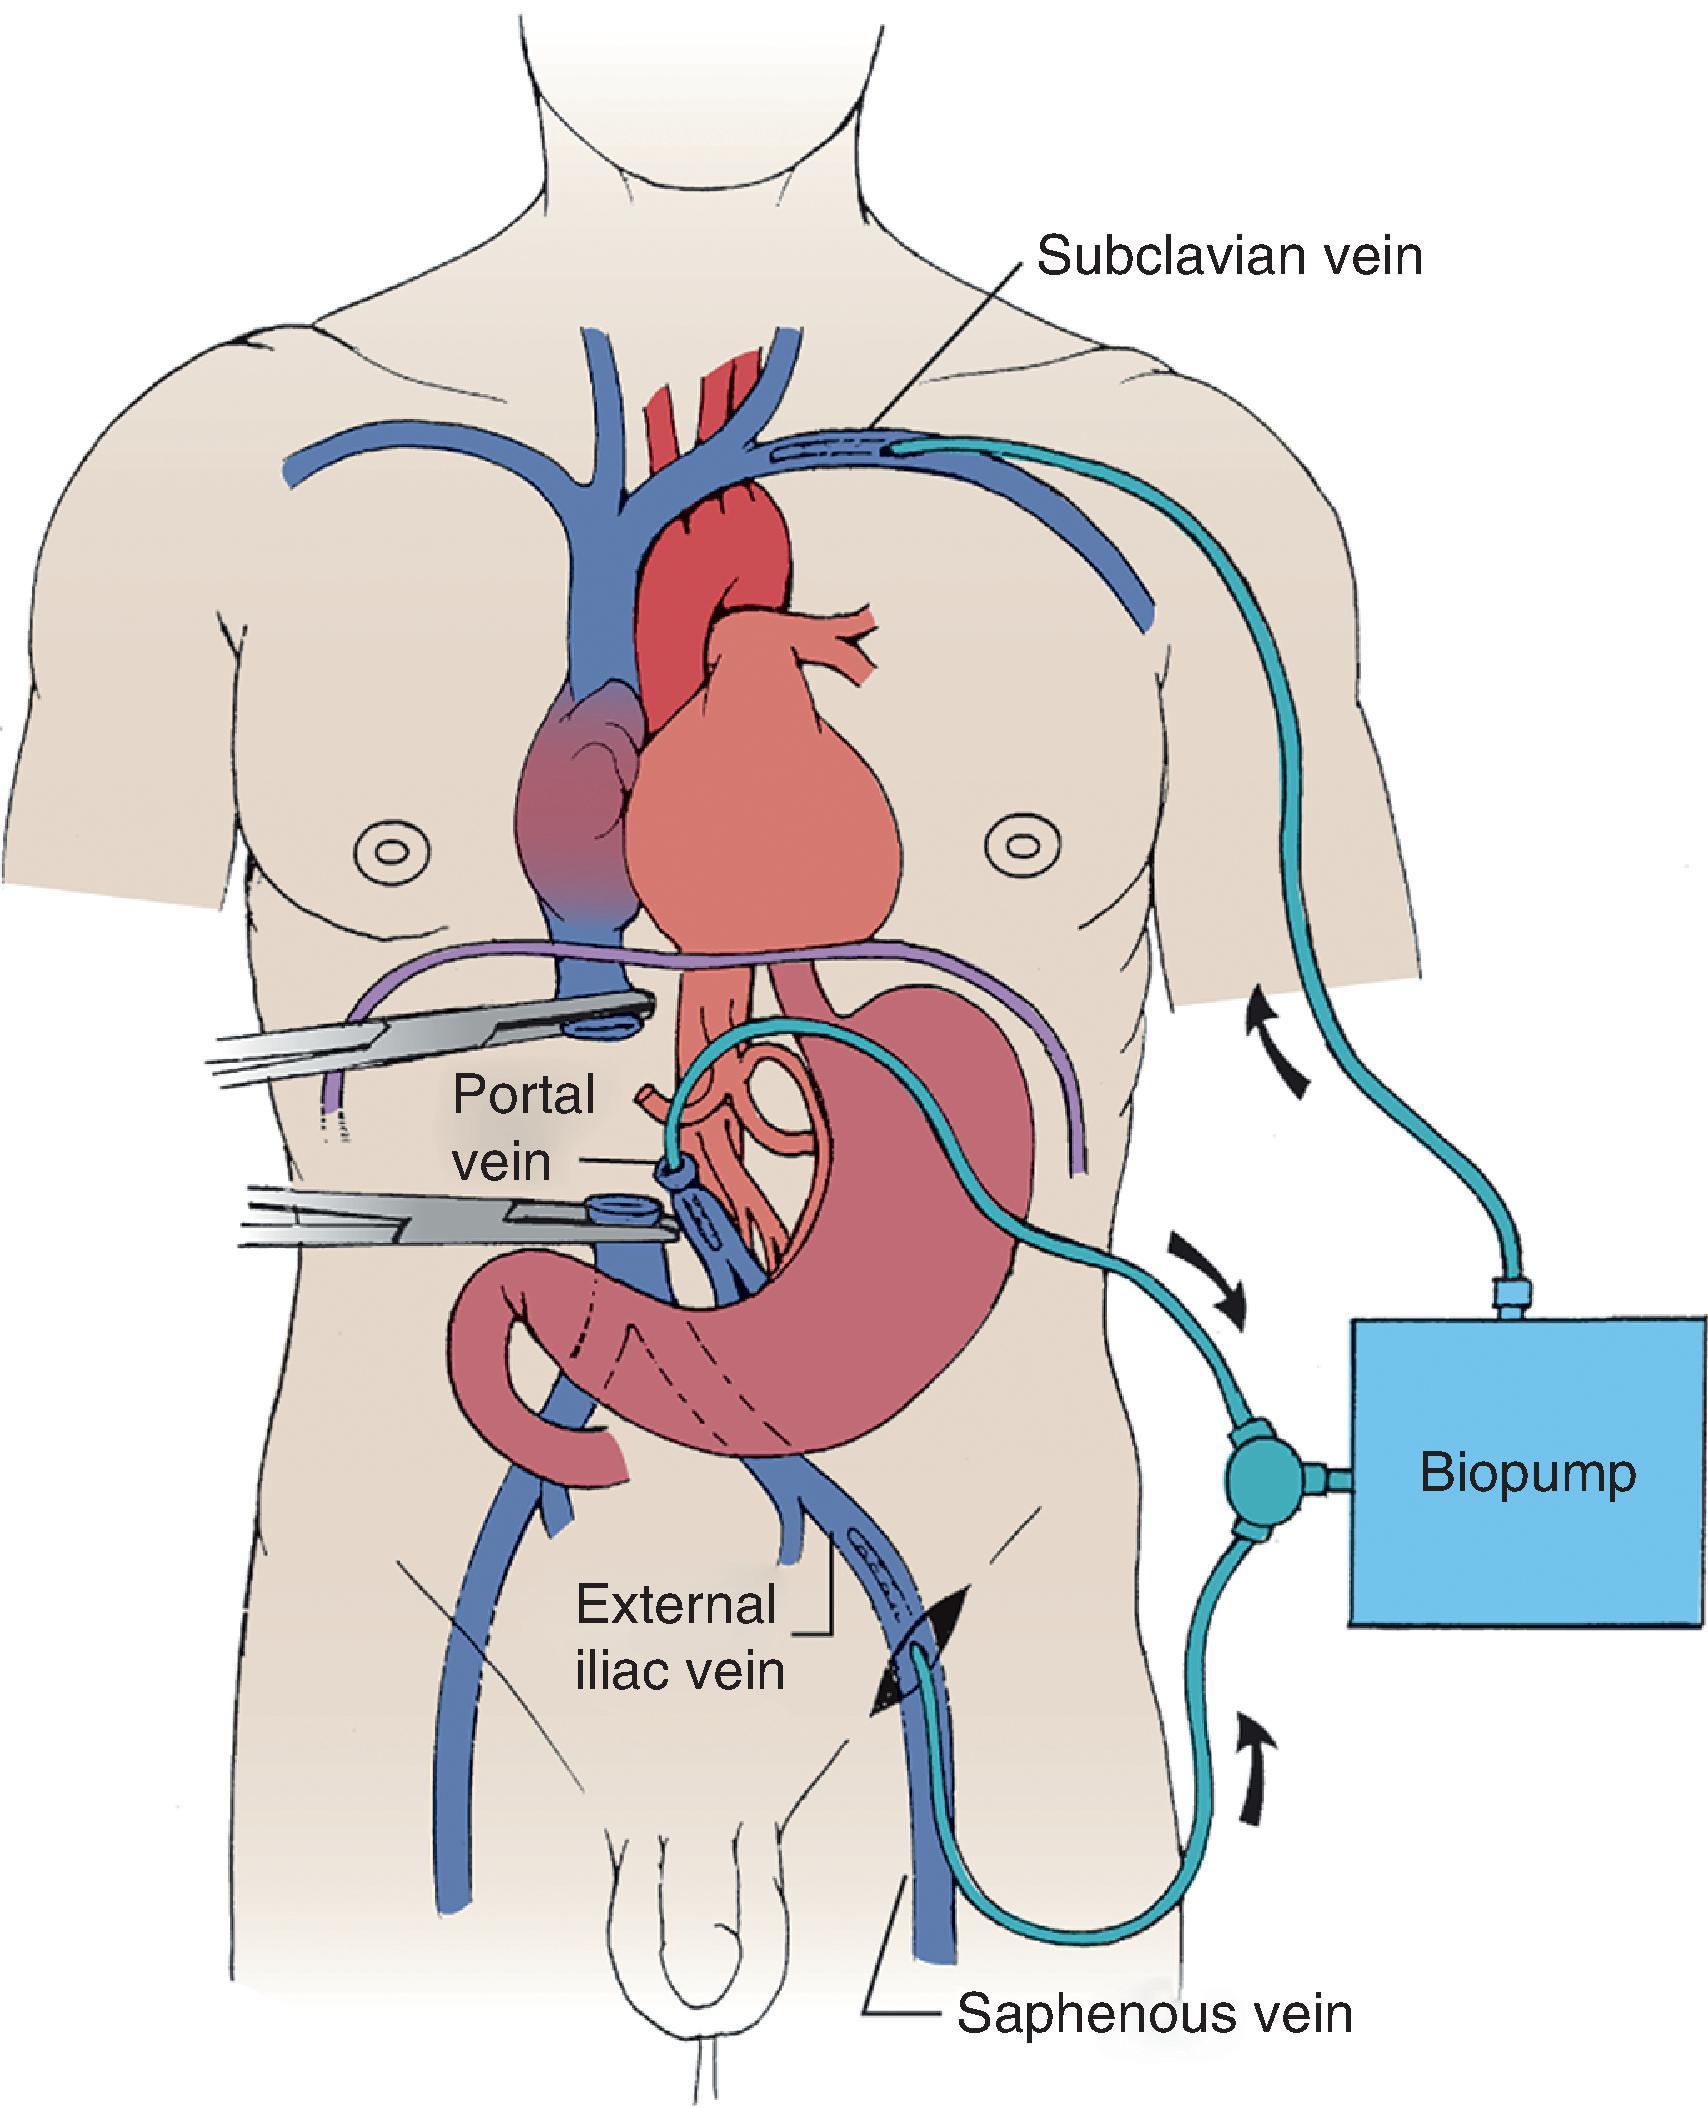 FIG. 6, The venovenous bypass requires cannulation of both the femoral vein and the axillary vein. A heparin-coated tubing connects the two cannulas. Flow is assisted by a centrifugal pump.